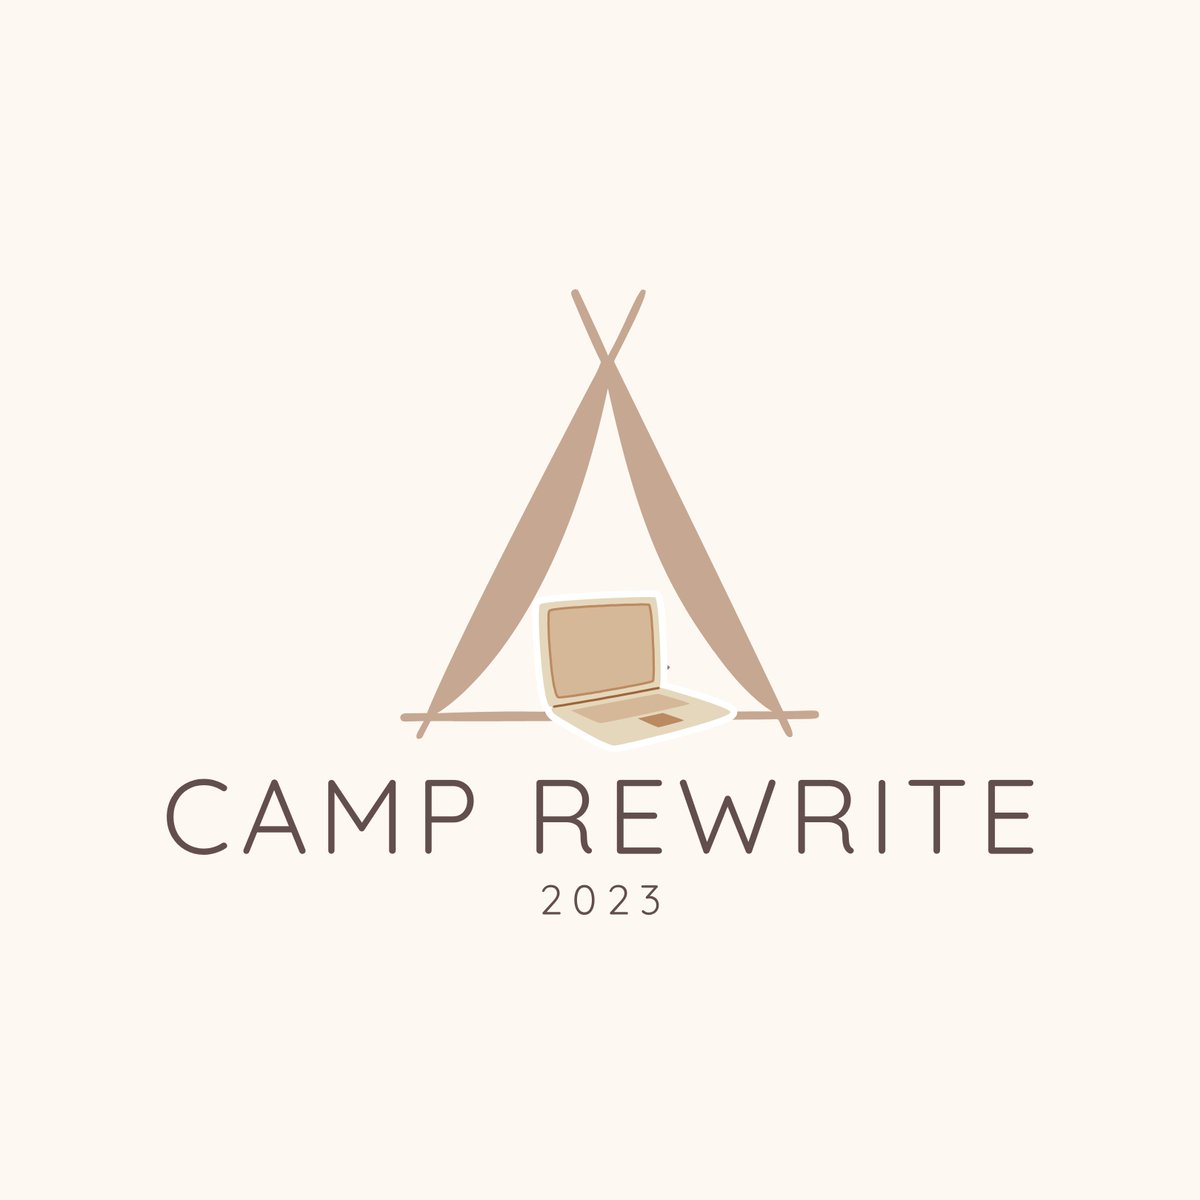 A Camp Rewrite Public Service Announcement: Early bird registration ends on Monday. Come join educators from across the country and world for a summer of rejuvenation, reconnection, and reimagining what we can do in our classrooms! camprewrite.substack.com/p/camp-rewrite…